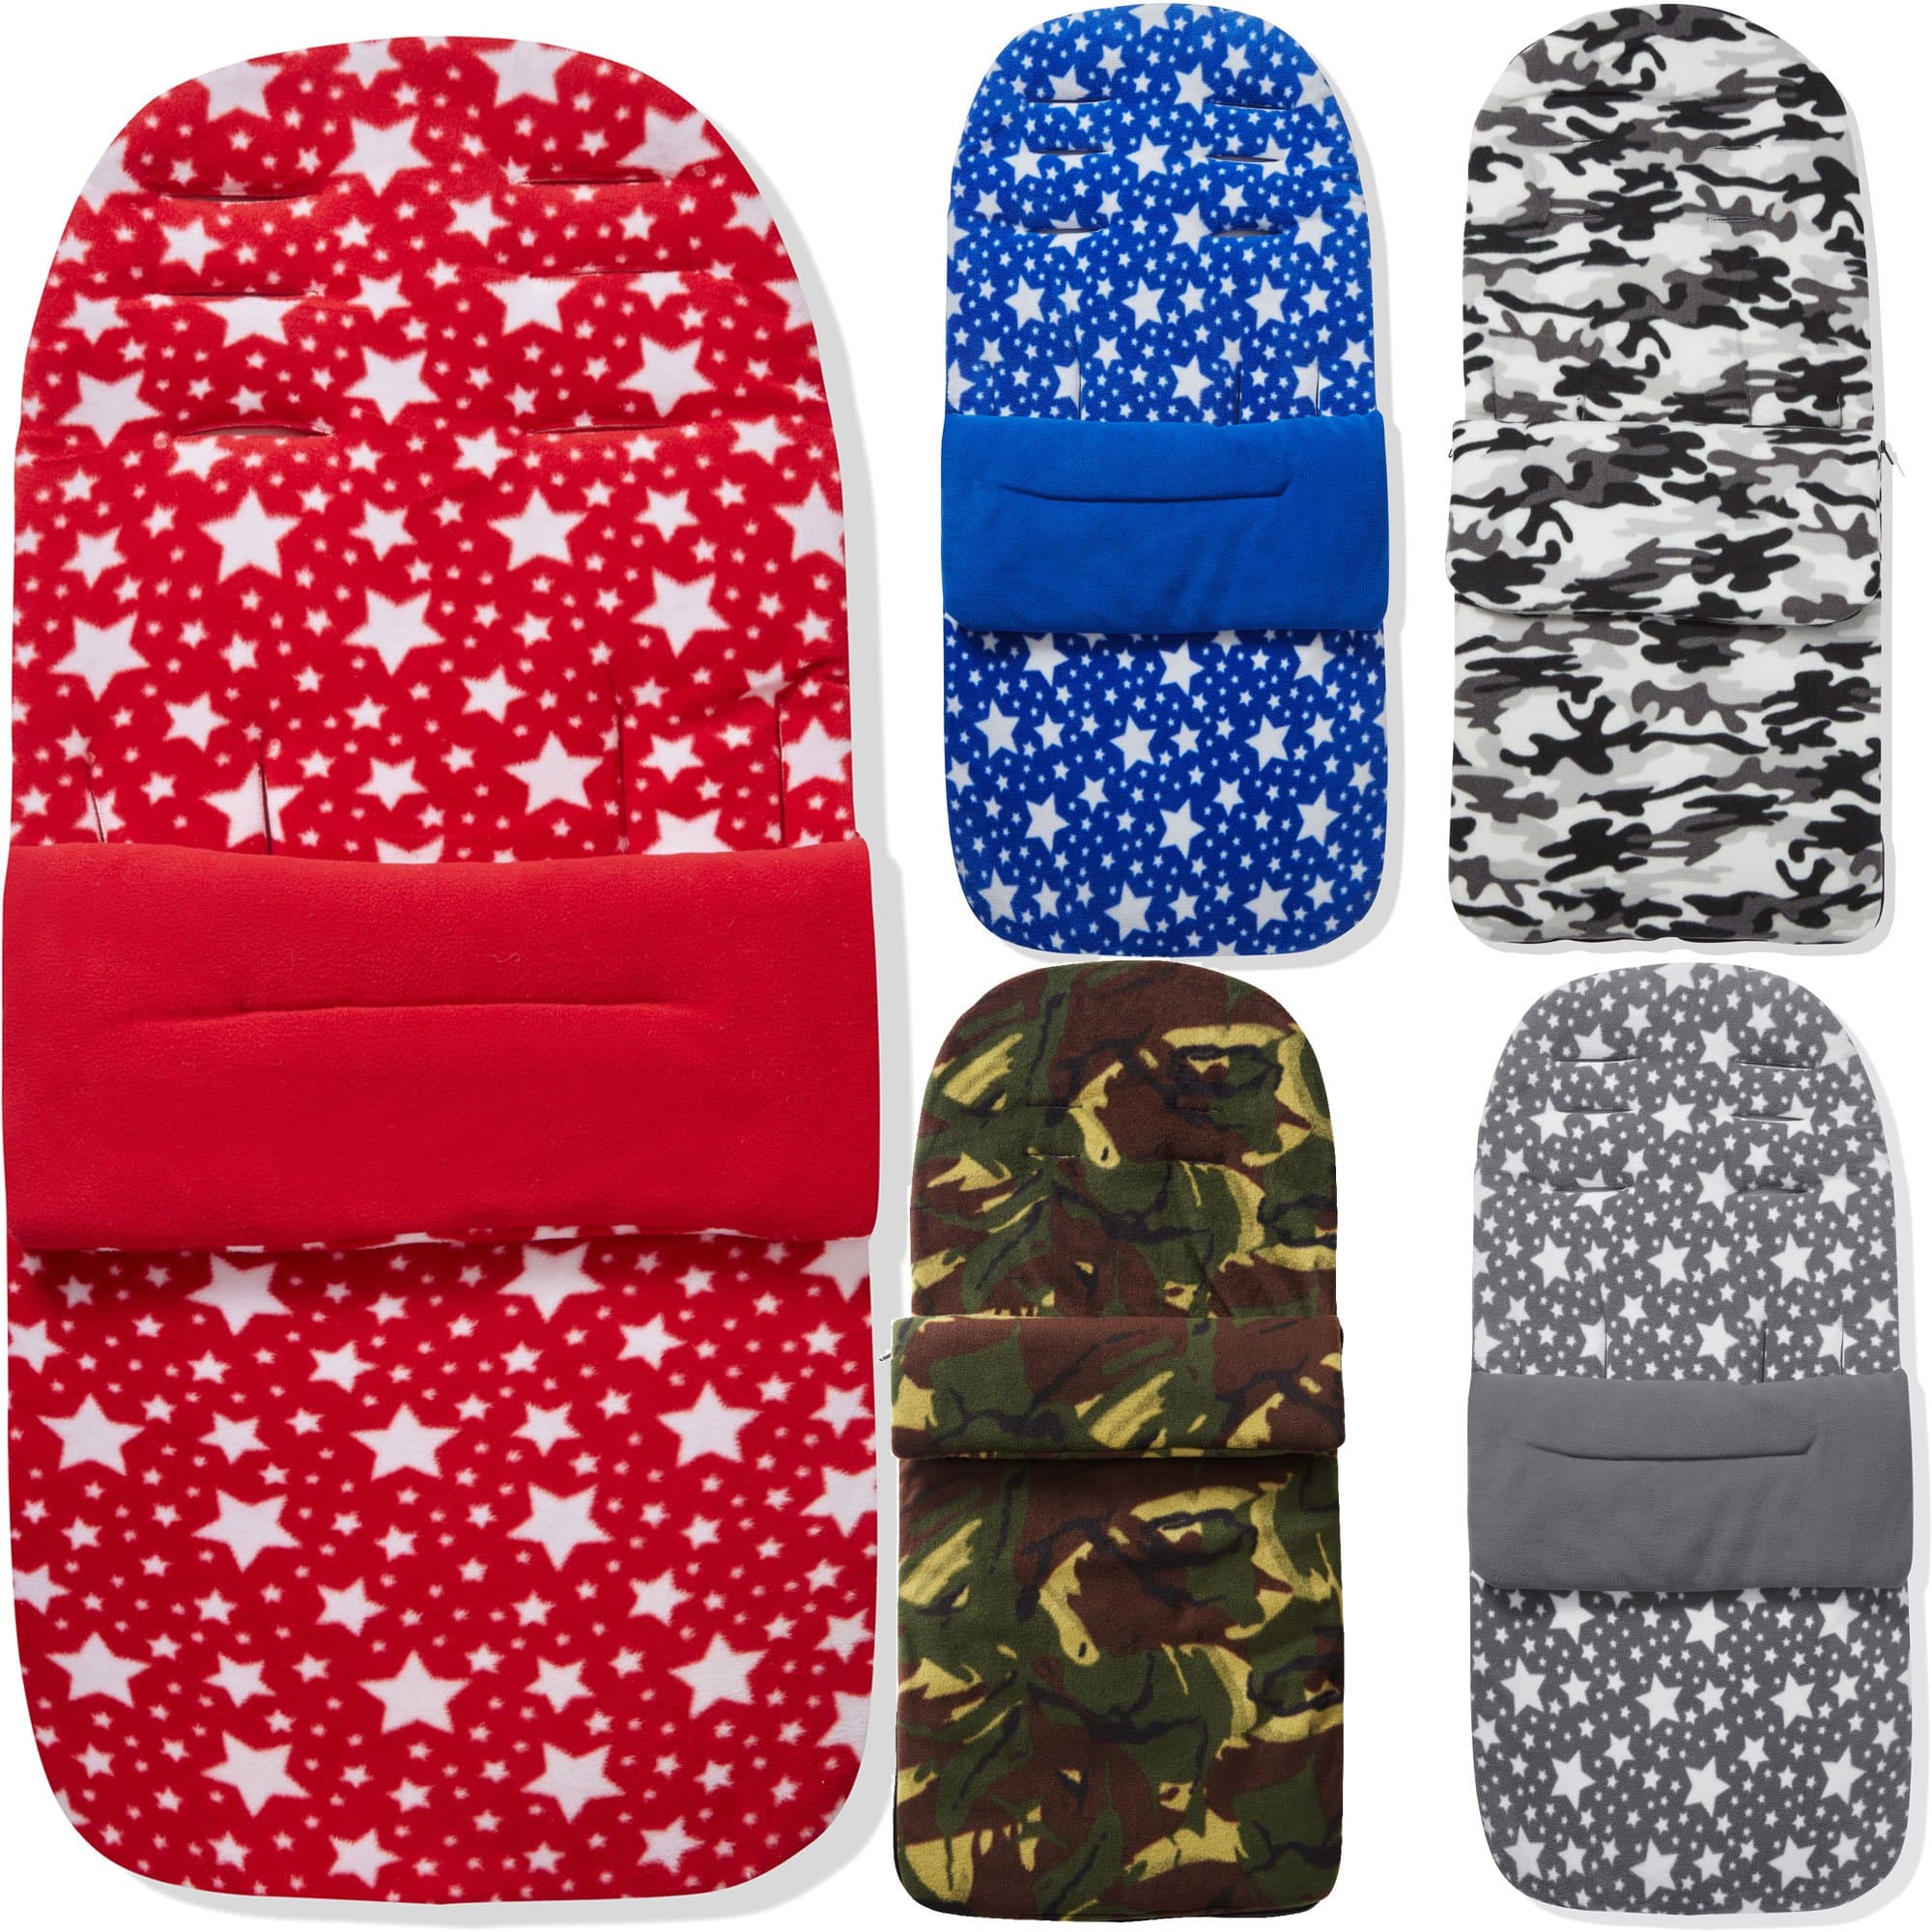 Universal Fleece Pushchair Footmuff / Cosy Toes - Fits All Pushchairs / Prams And Buggies   